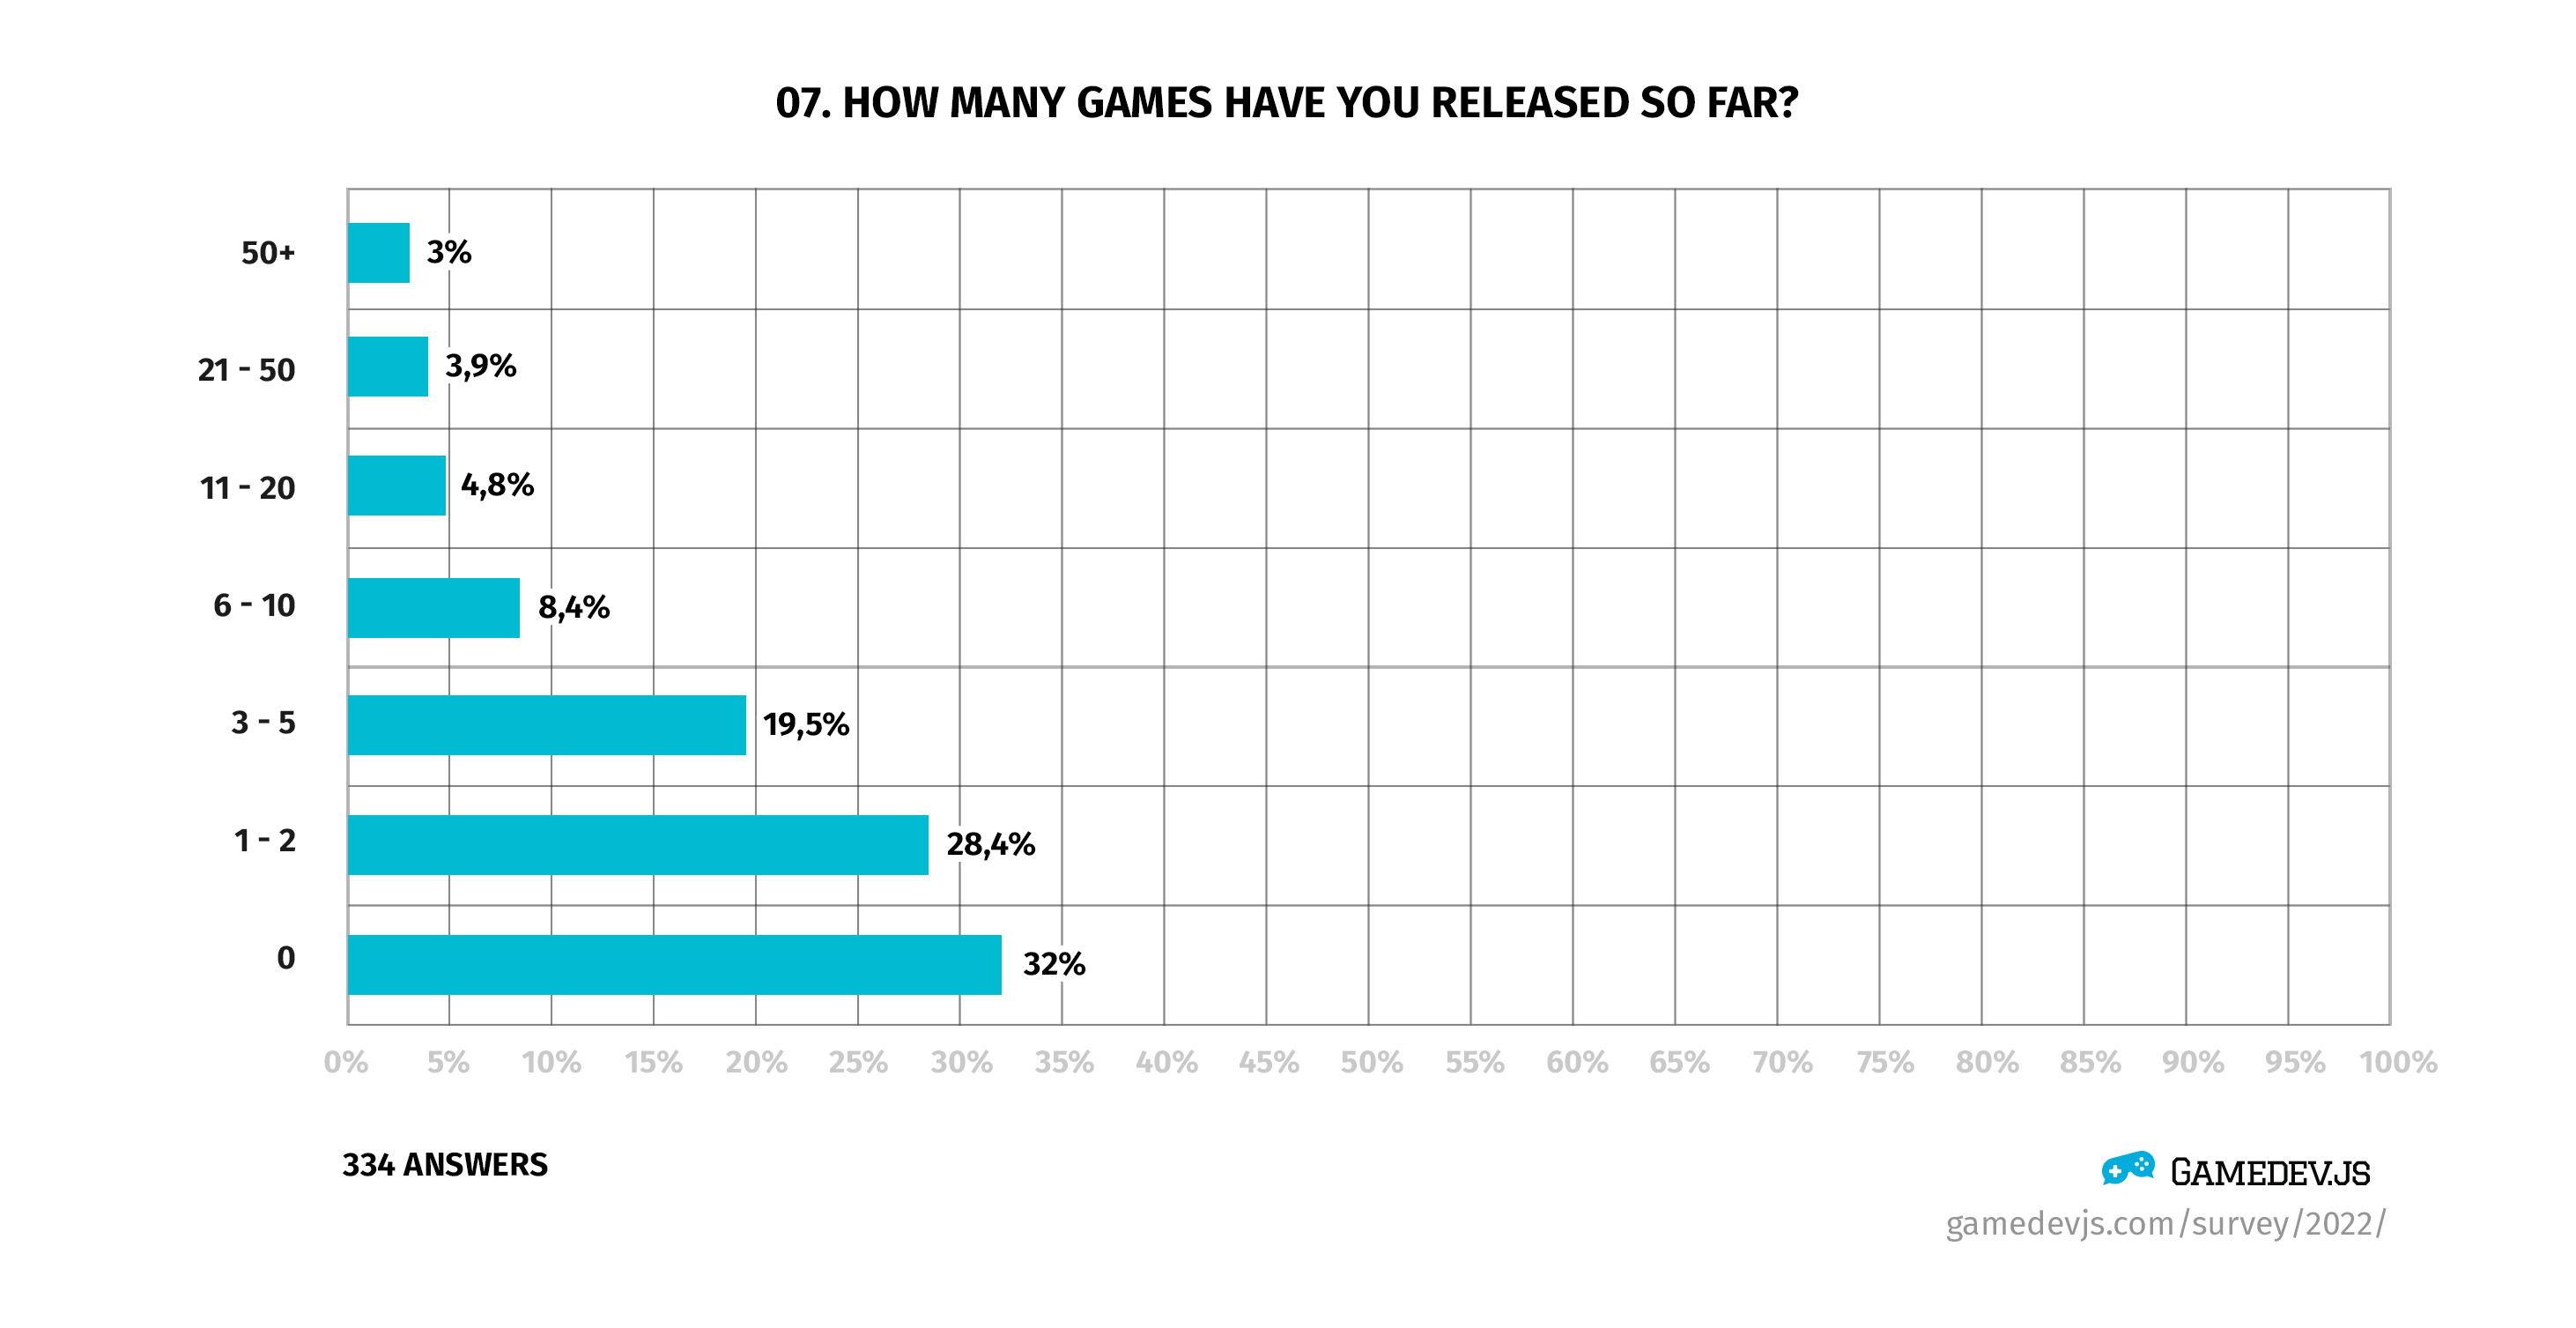 Gamedev.js Survey 2022 - Question #7: How many games have you released so far?